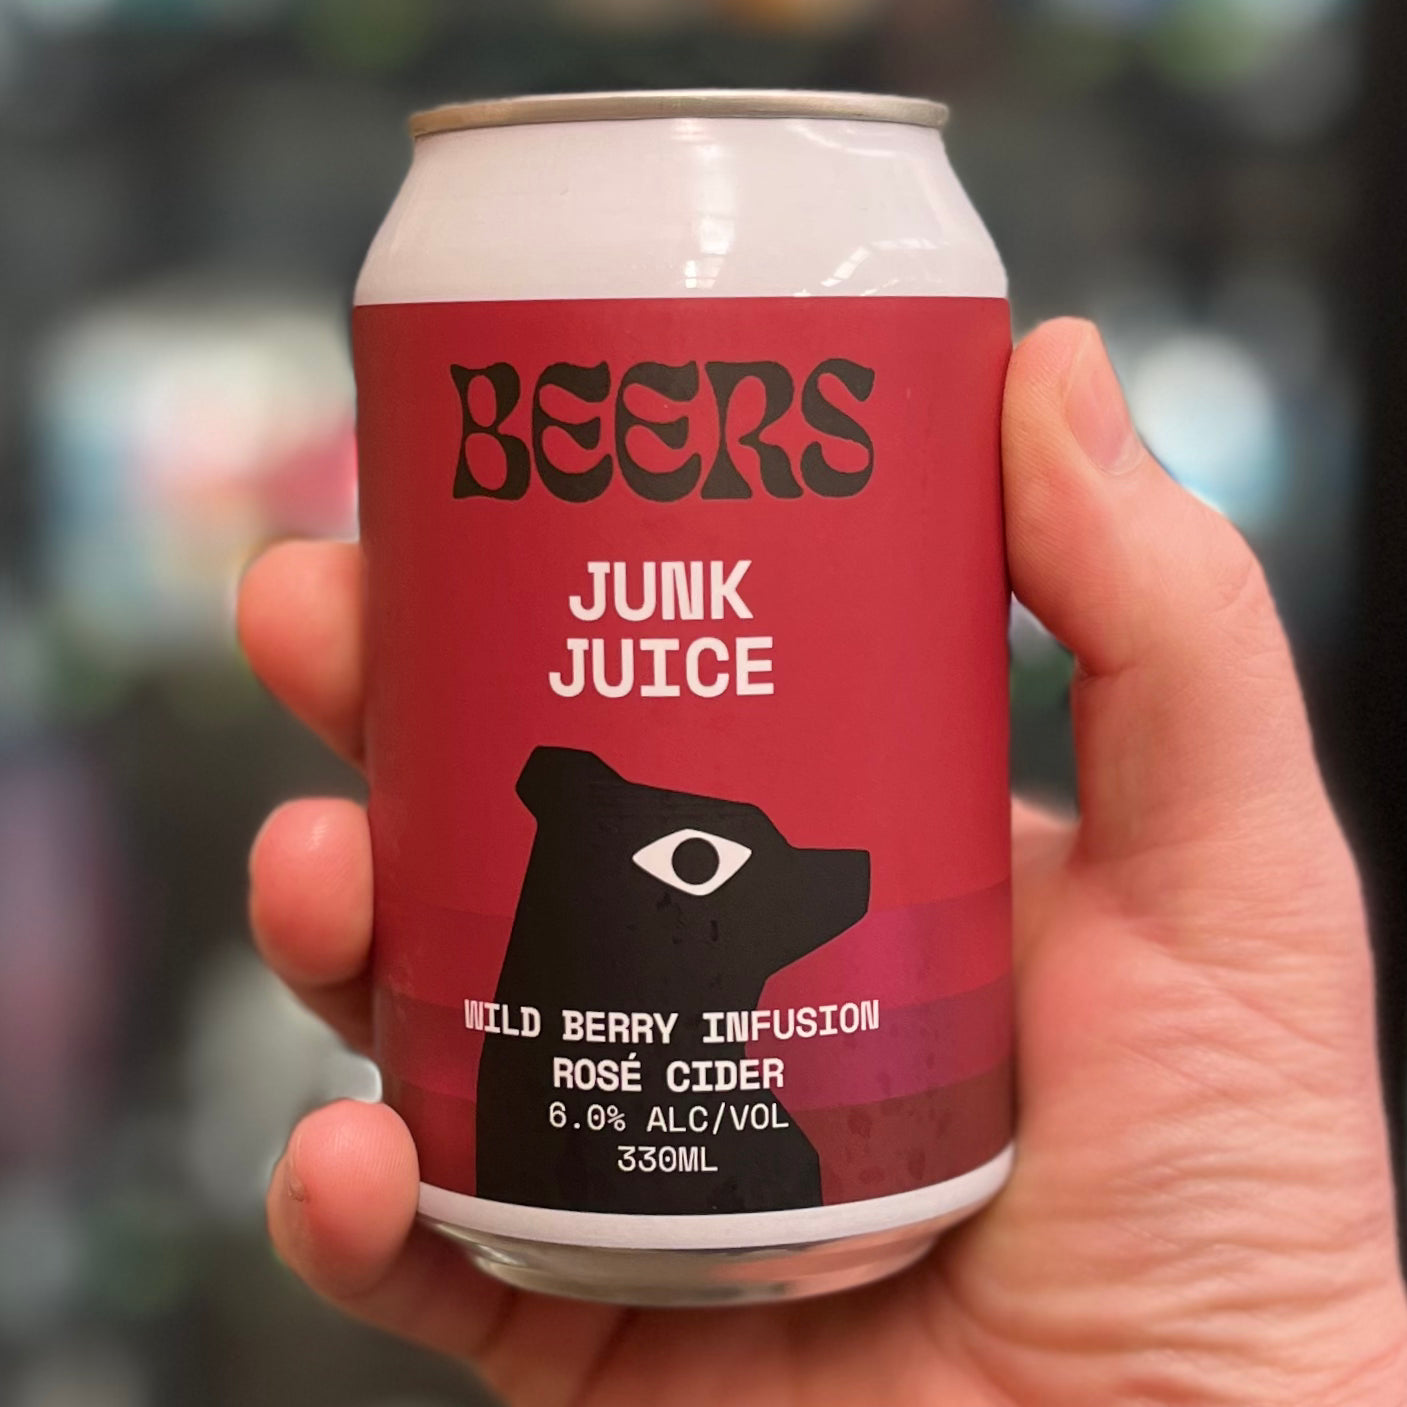 Junk Juice Wild berry Infusion Rose Cider